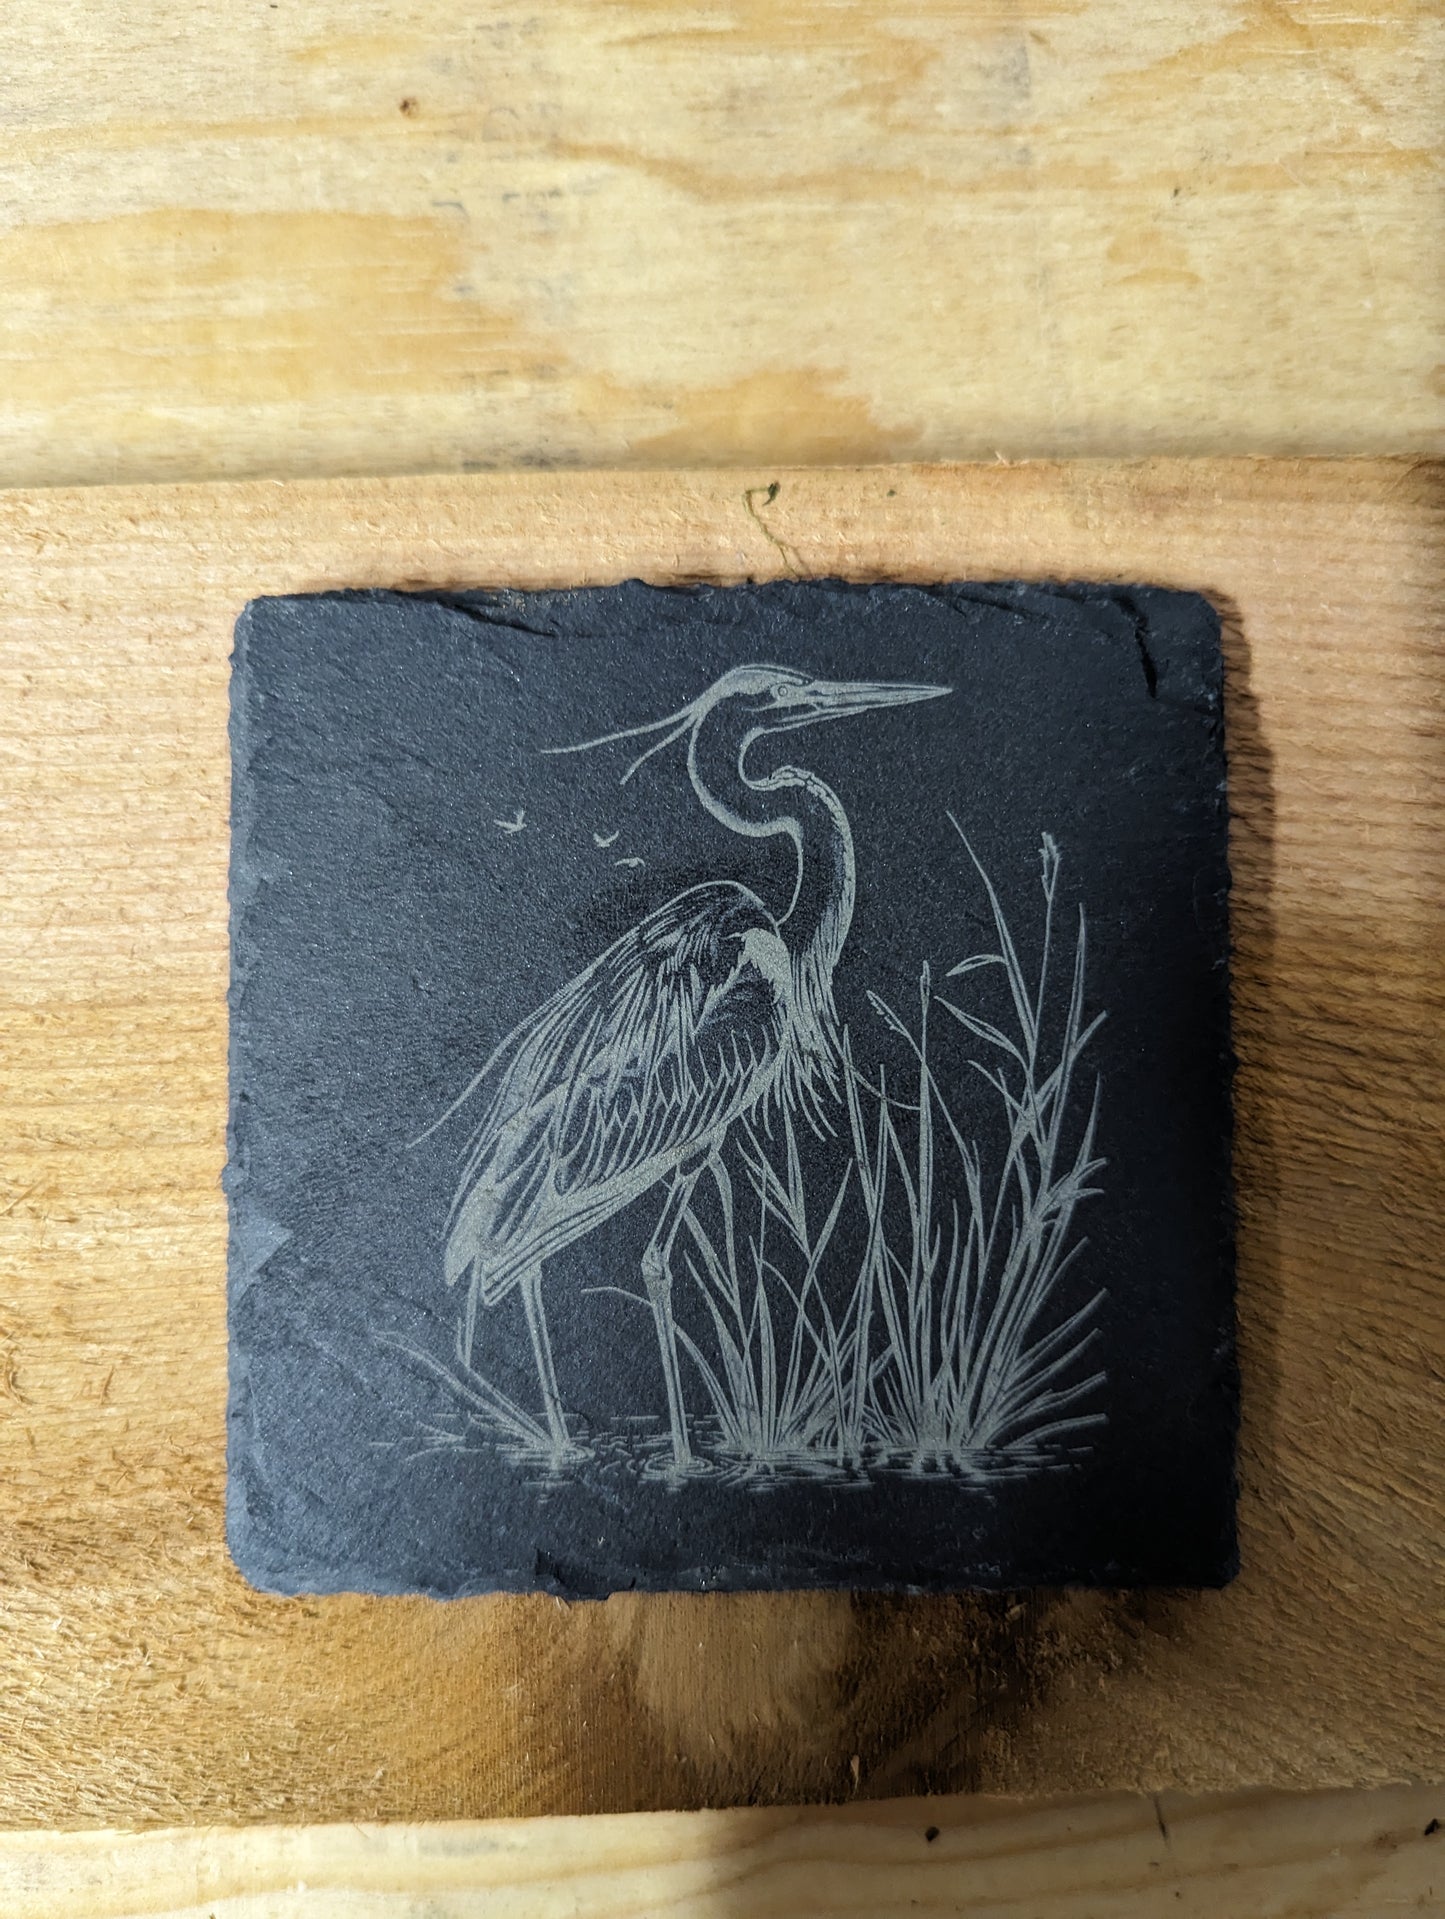 Slate Coaster with Red Cardinal, Great Blue Heron, Spotted Sandpiper and Sandhill Crane